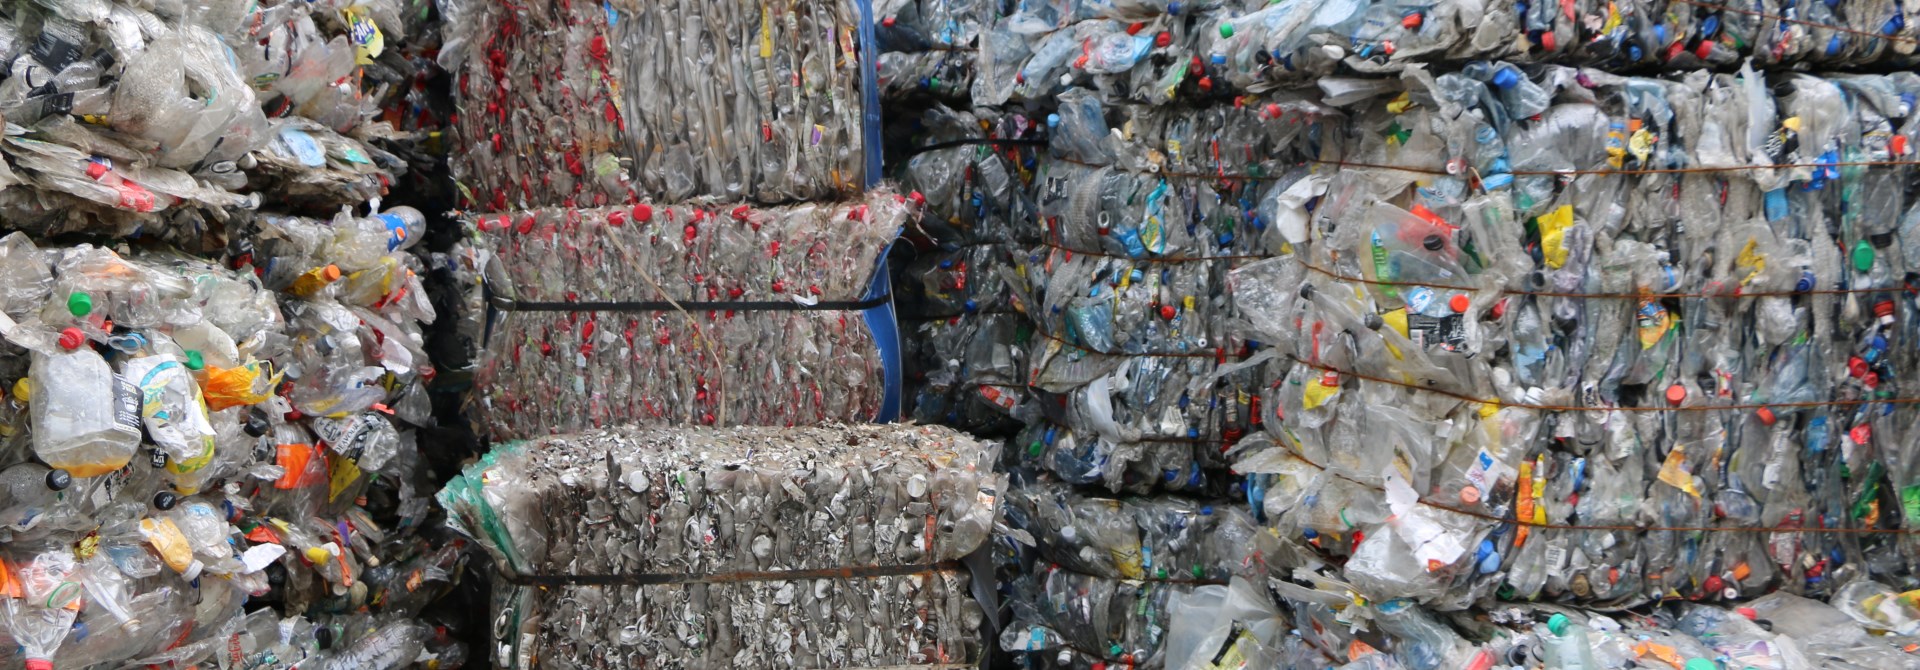 Bales of plastic bottles, thousands of them, ready to be sent to a recycling plant.